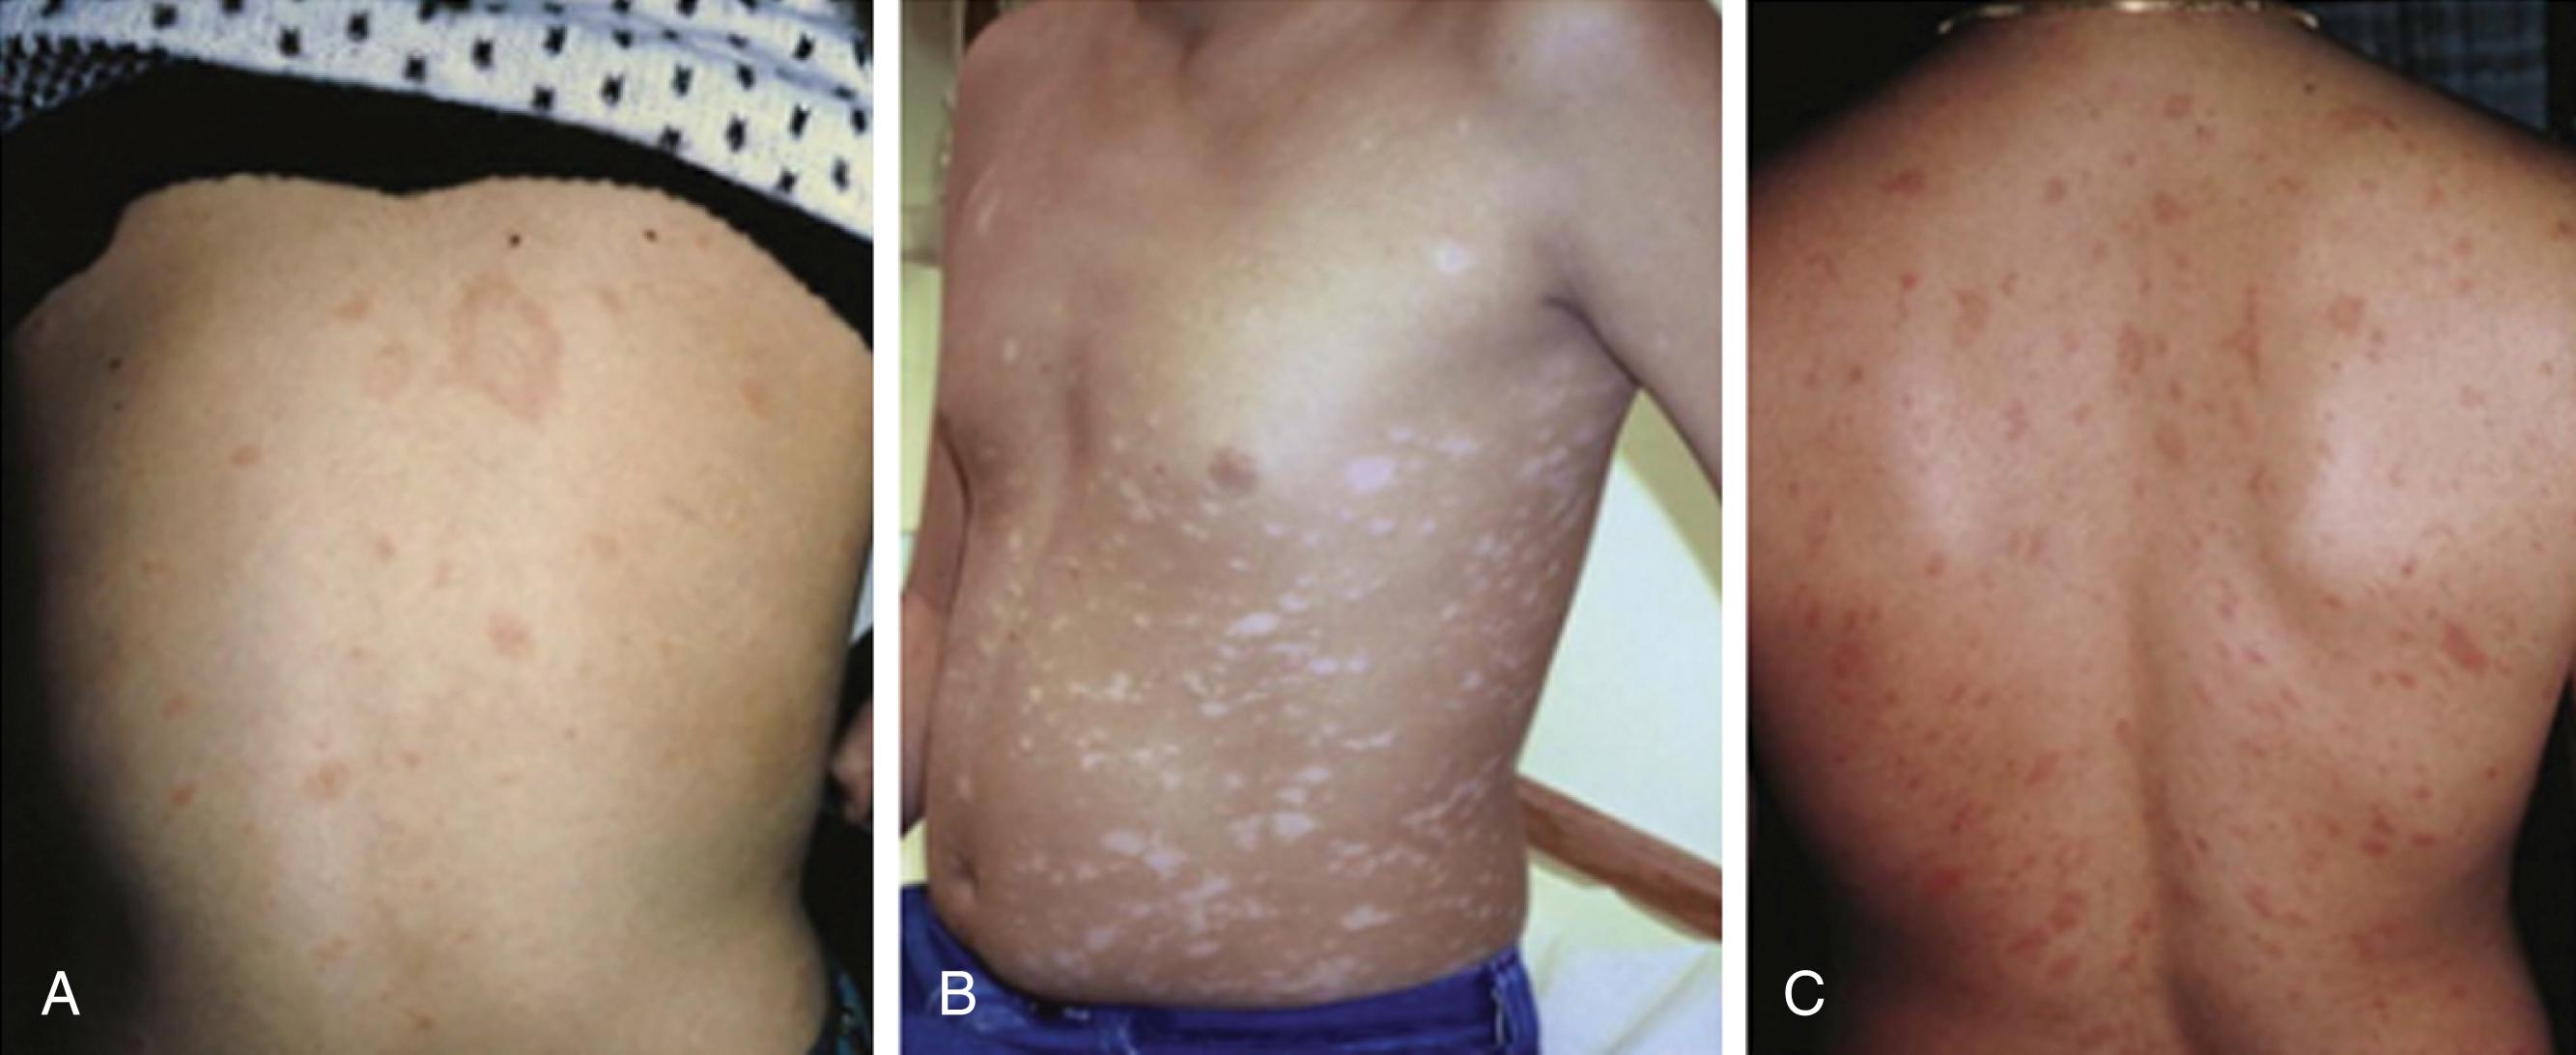 Fig. 61.4, Pityriasis rosea. A , The herald patch. B, Oval lesions oriented along the lines of skin cleavage on the trunk. C, Christmas tree distribution on the back.